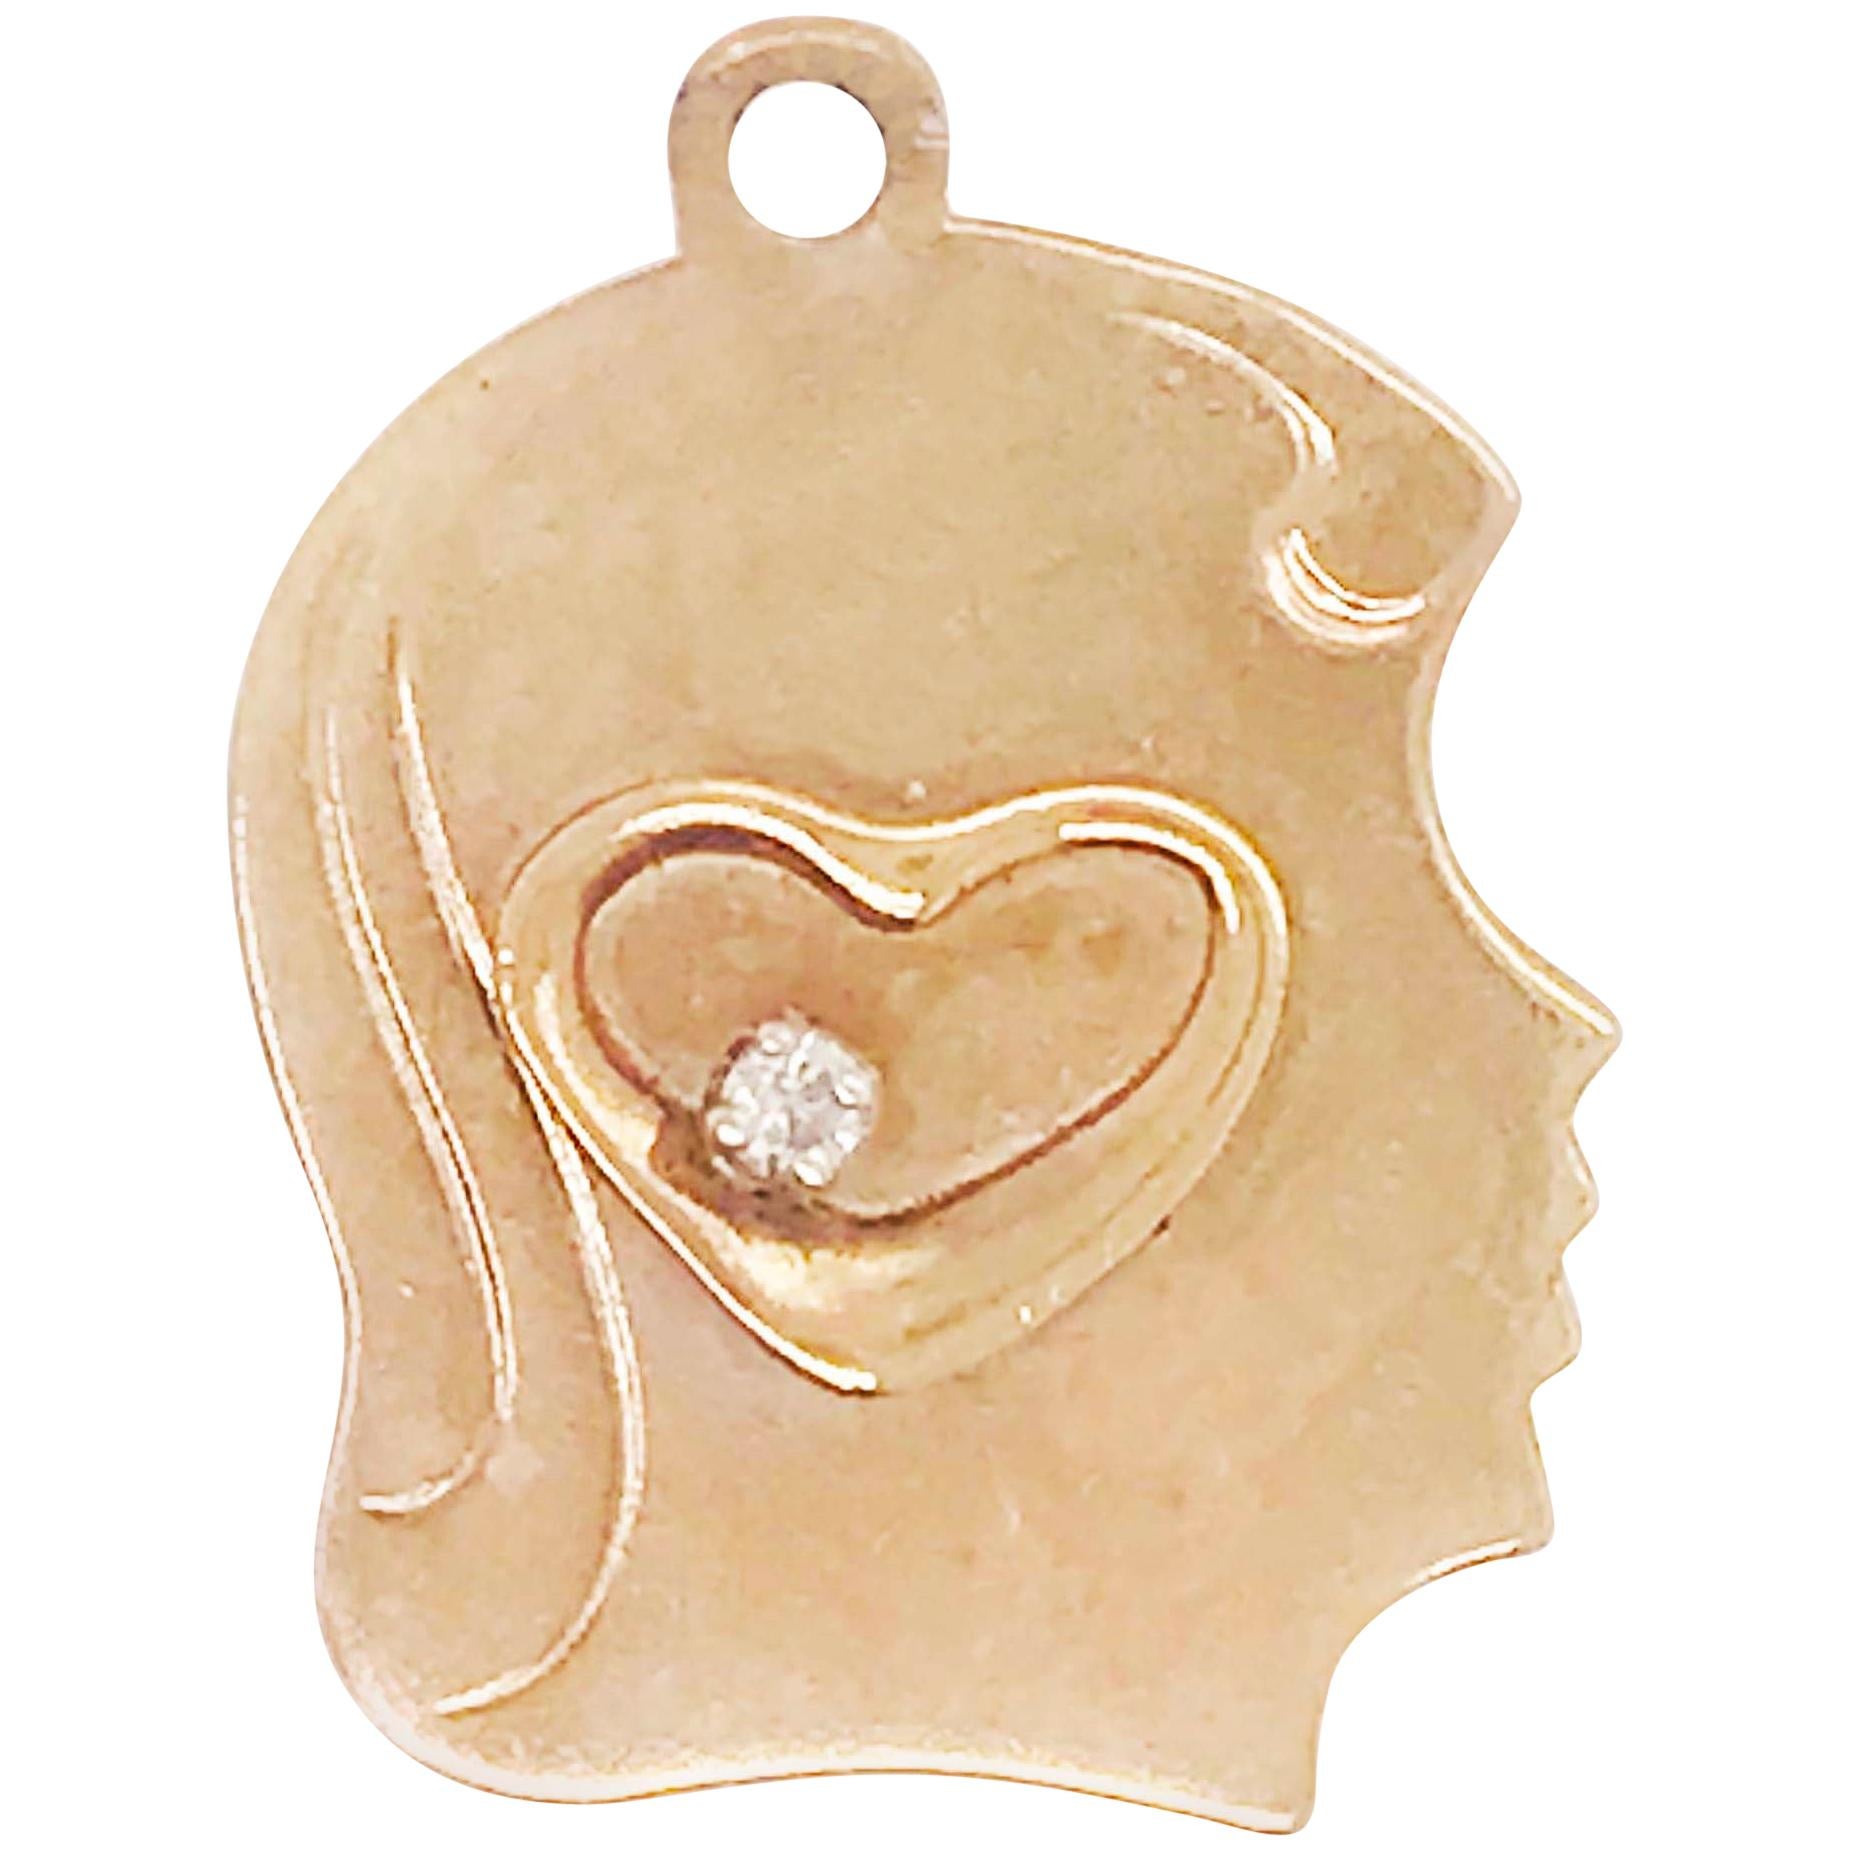 0.03 Carat Diamond Heart and Child's Profile Engrave-Able Charm in 14 Karat Gold